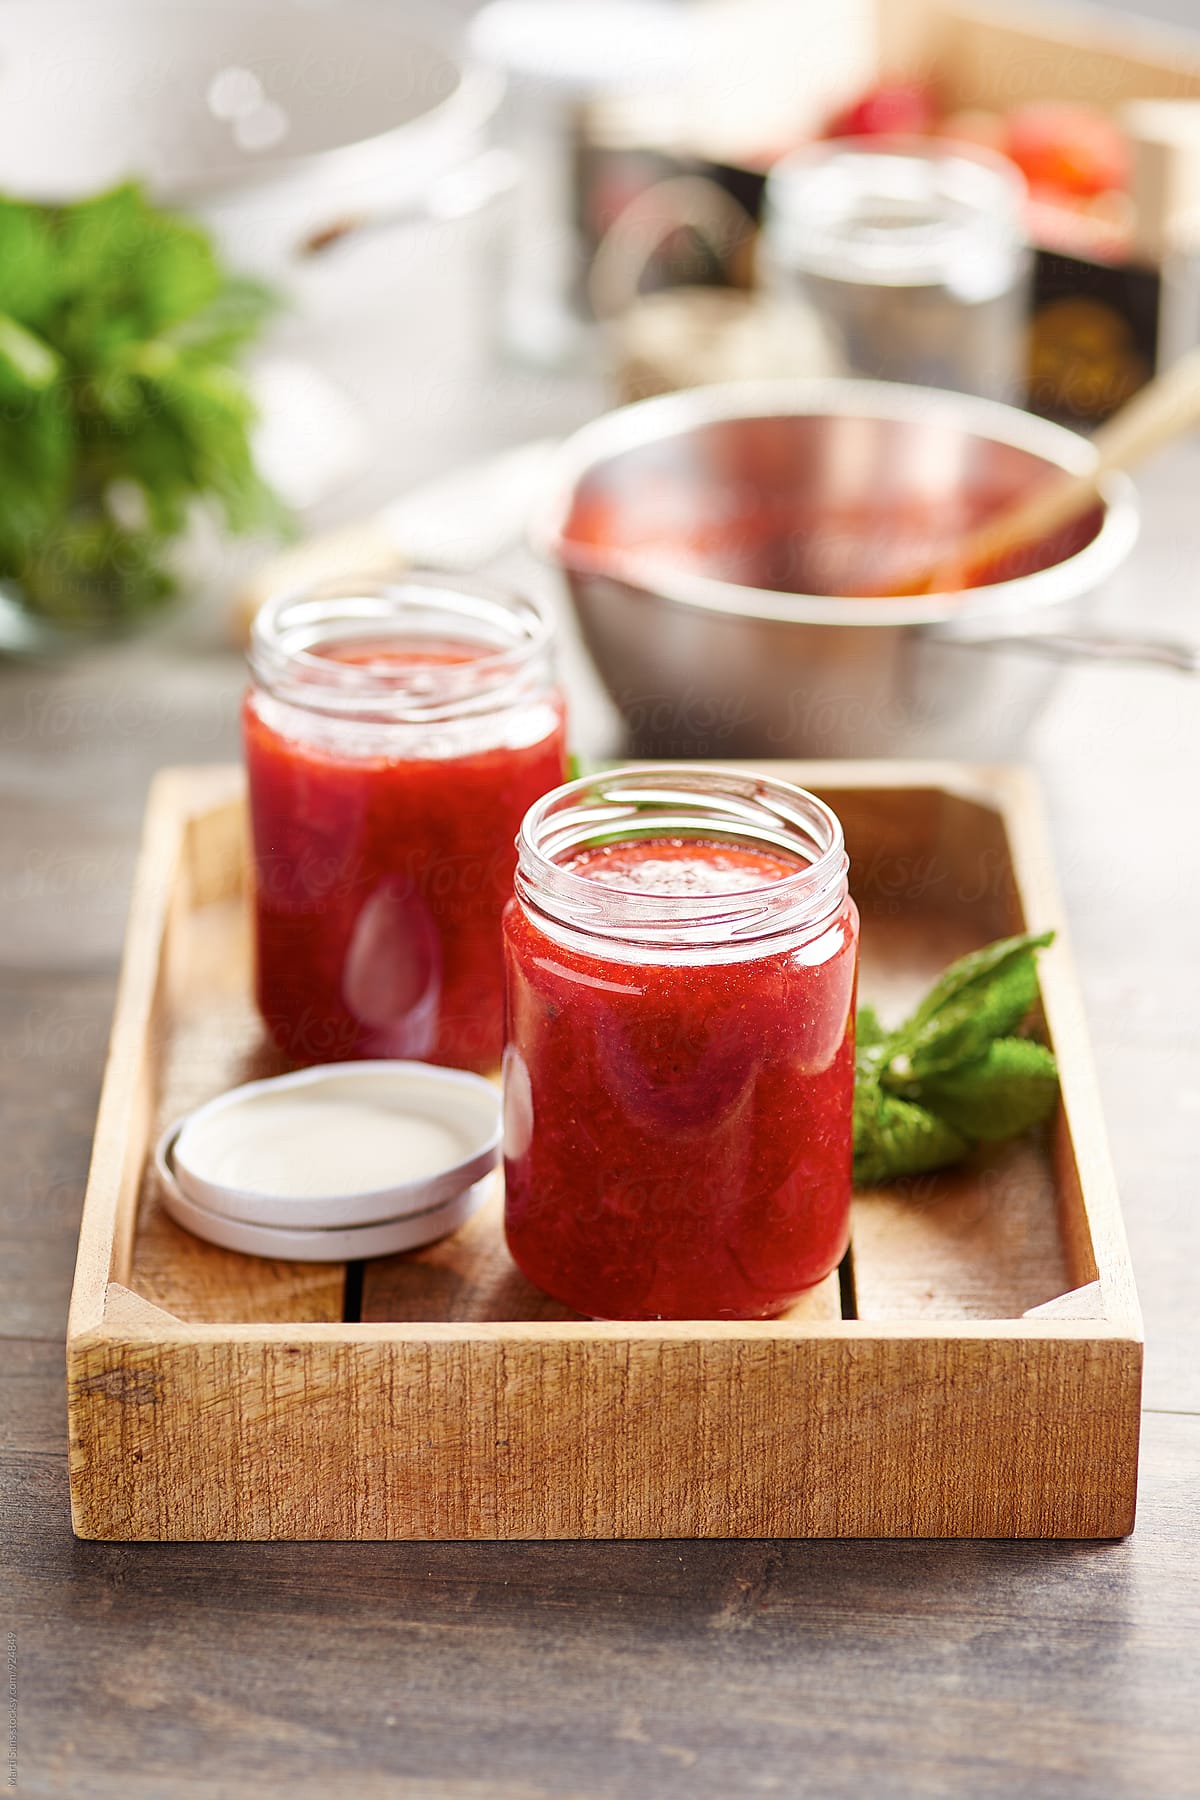 Sweet strawberry jam in glass cans